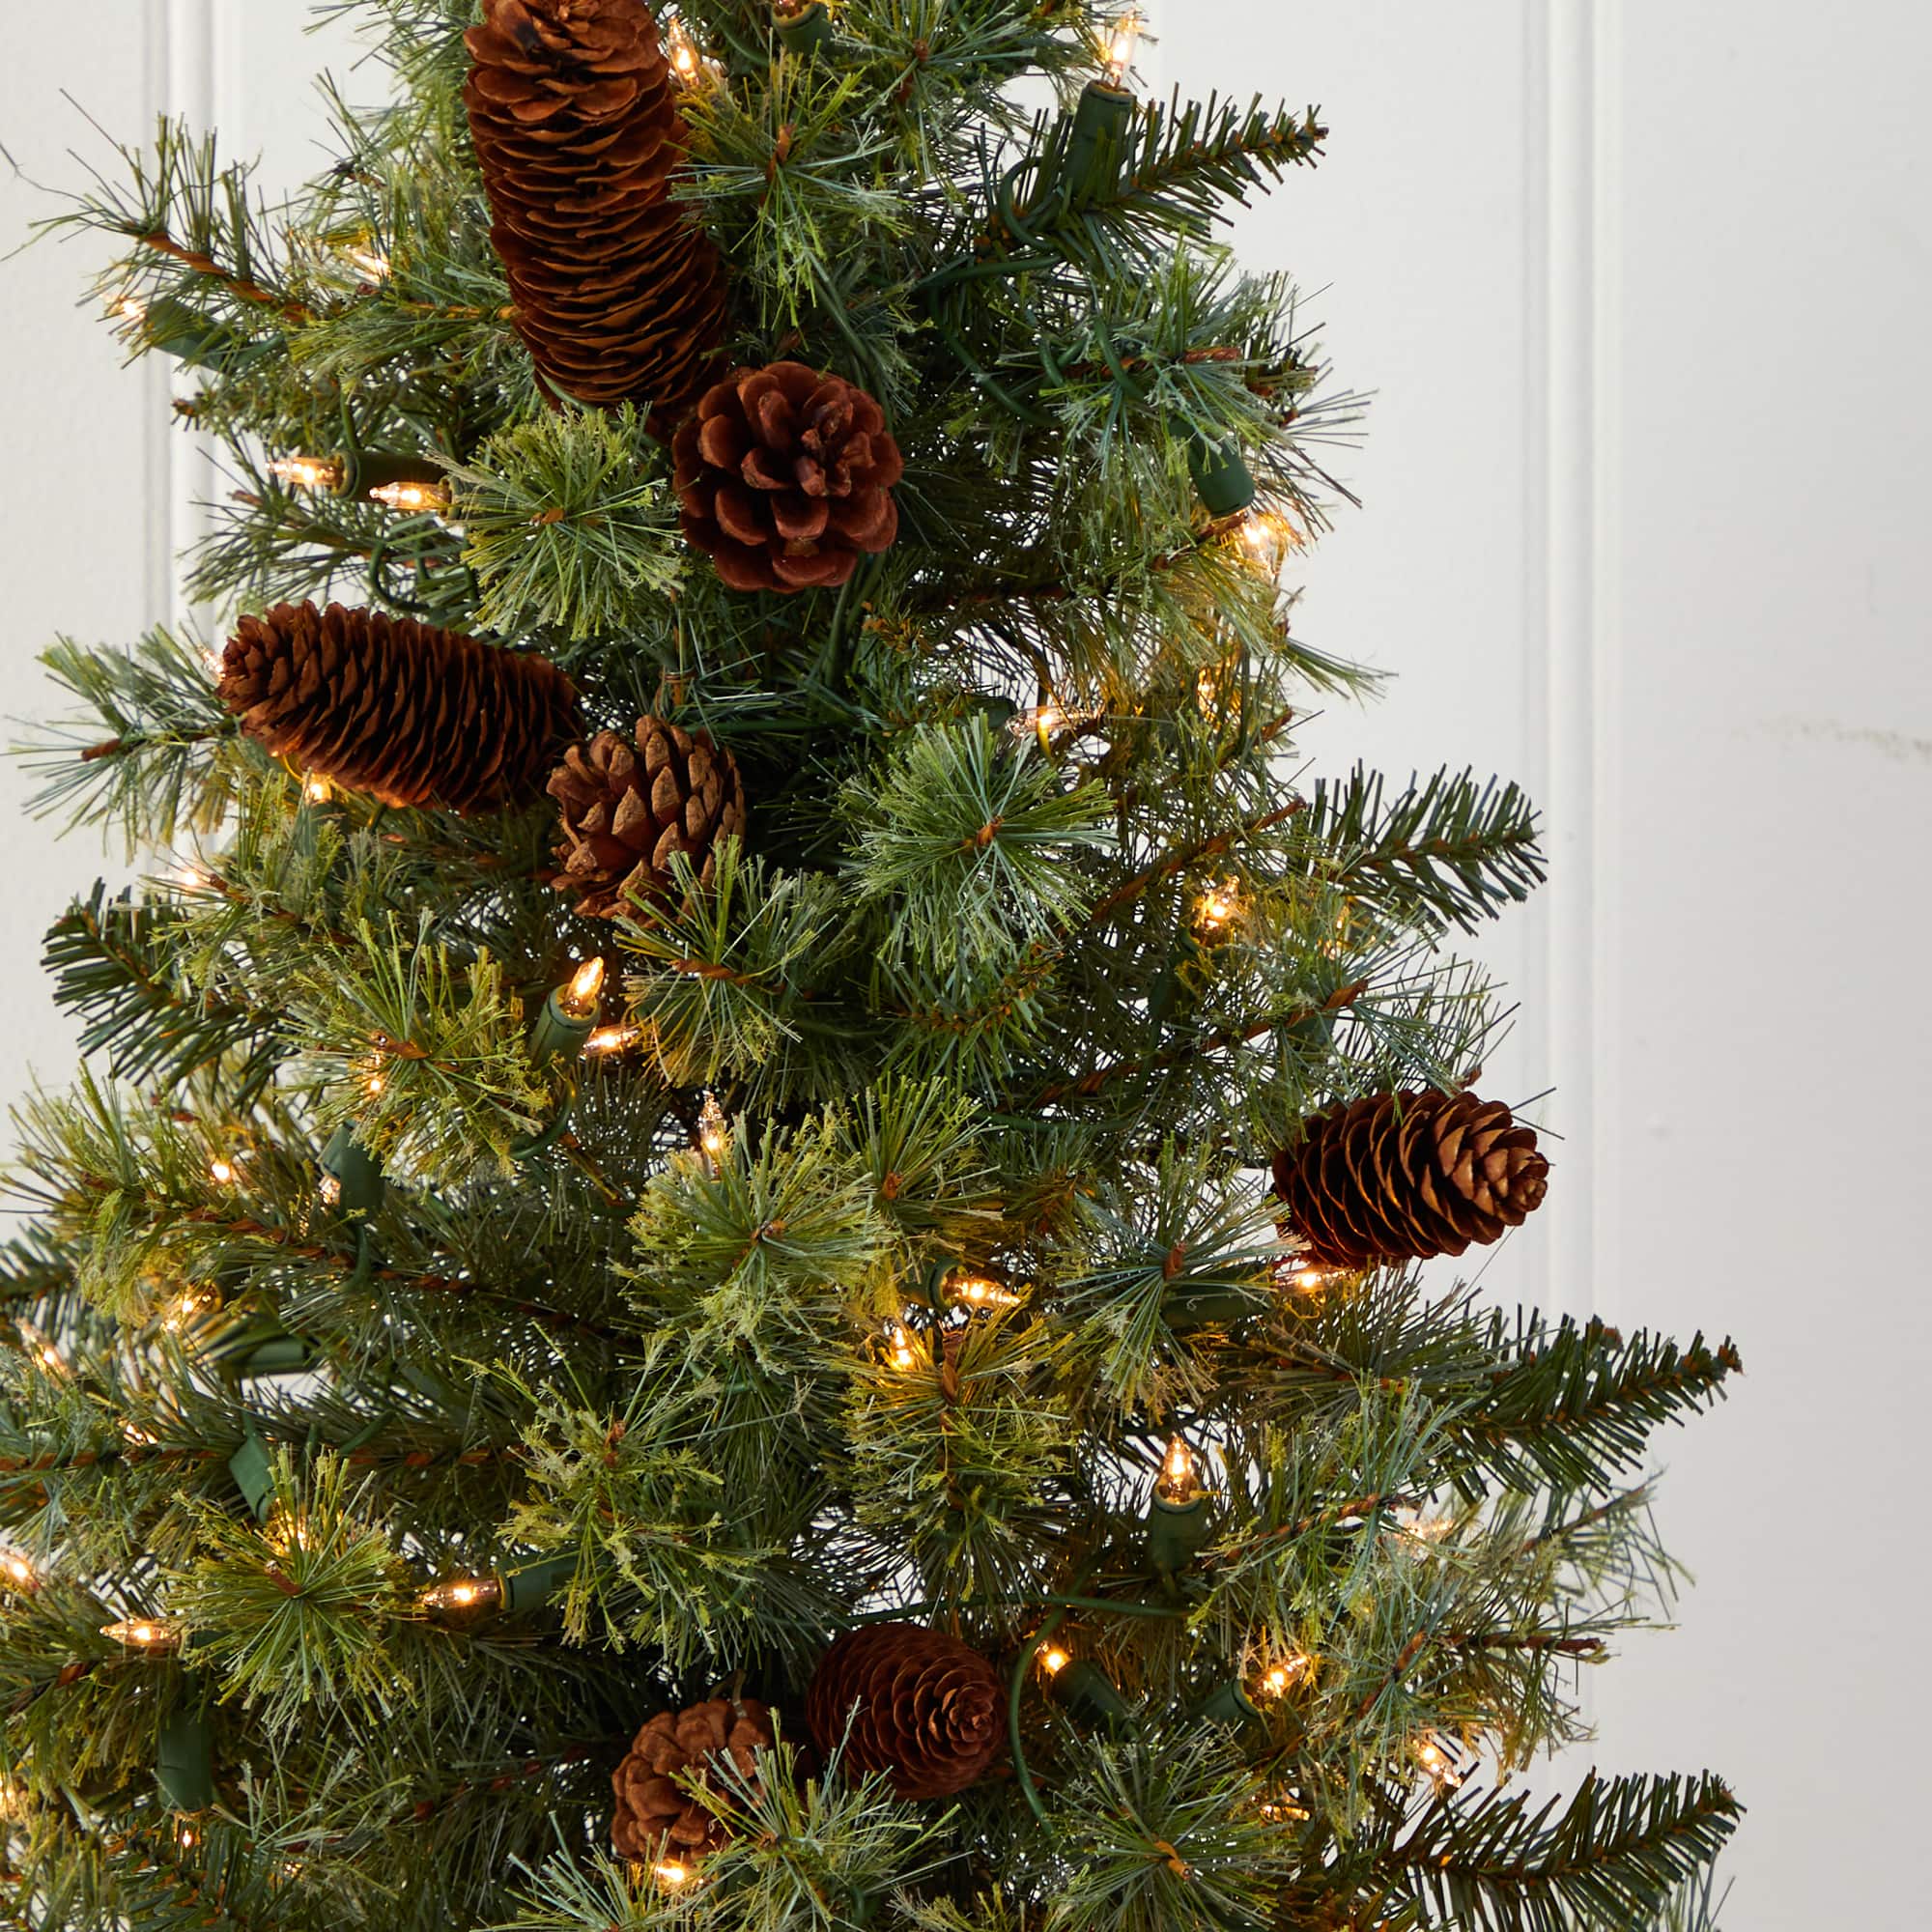 3ft. Pre-Lit Artificial Christmas Tree with Pinecones, Clear Lights